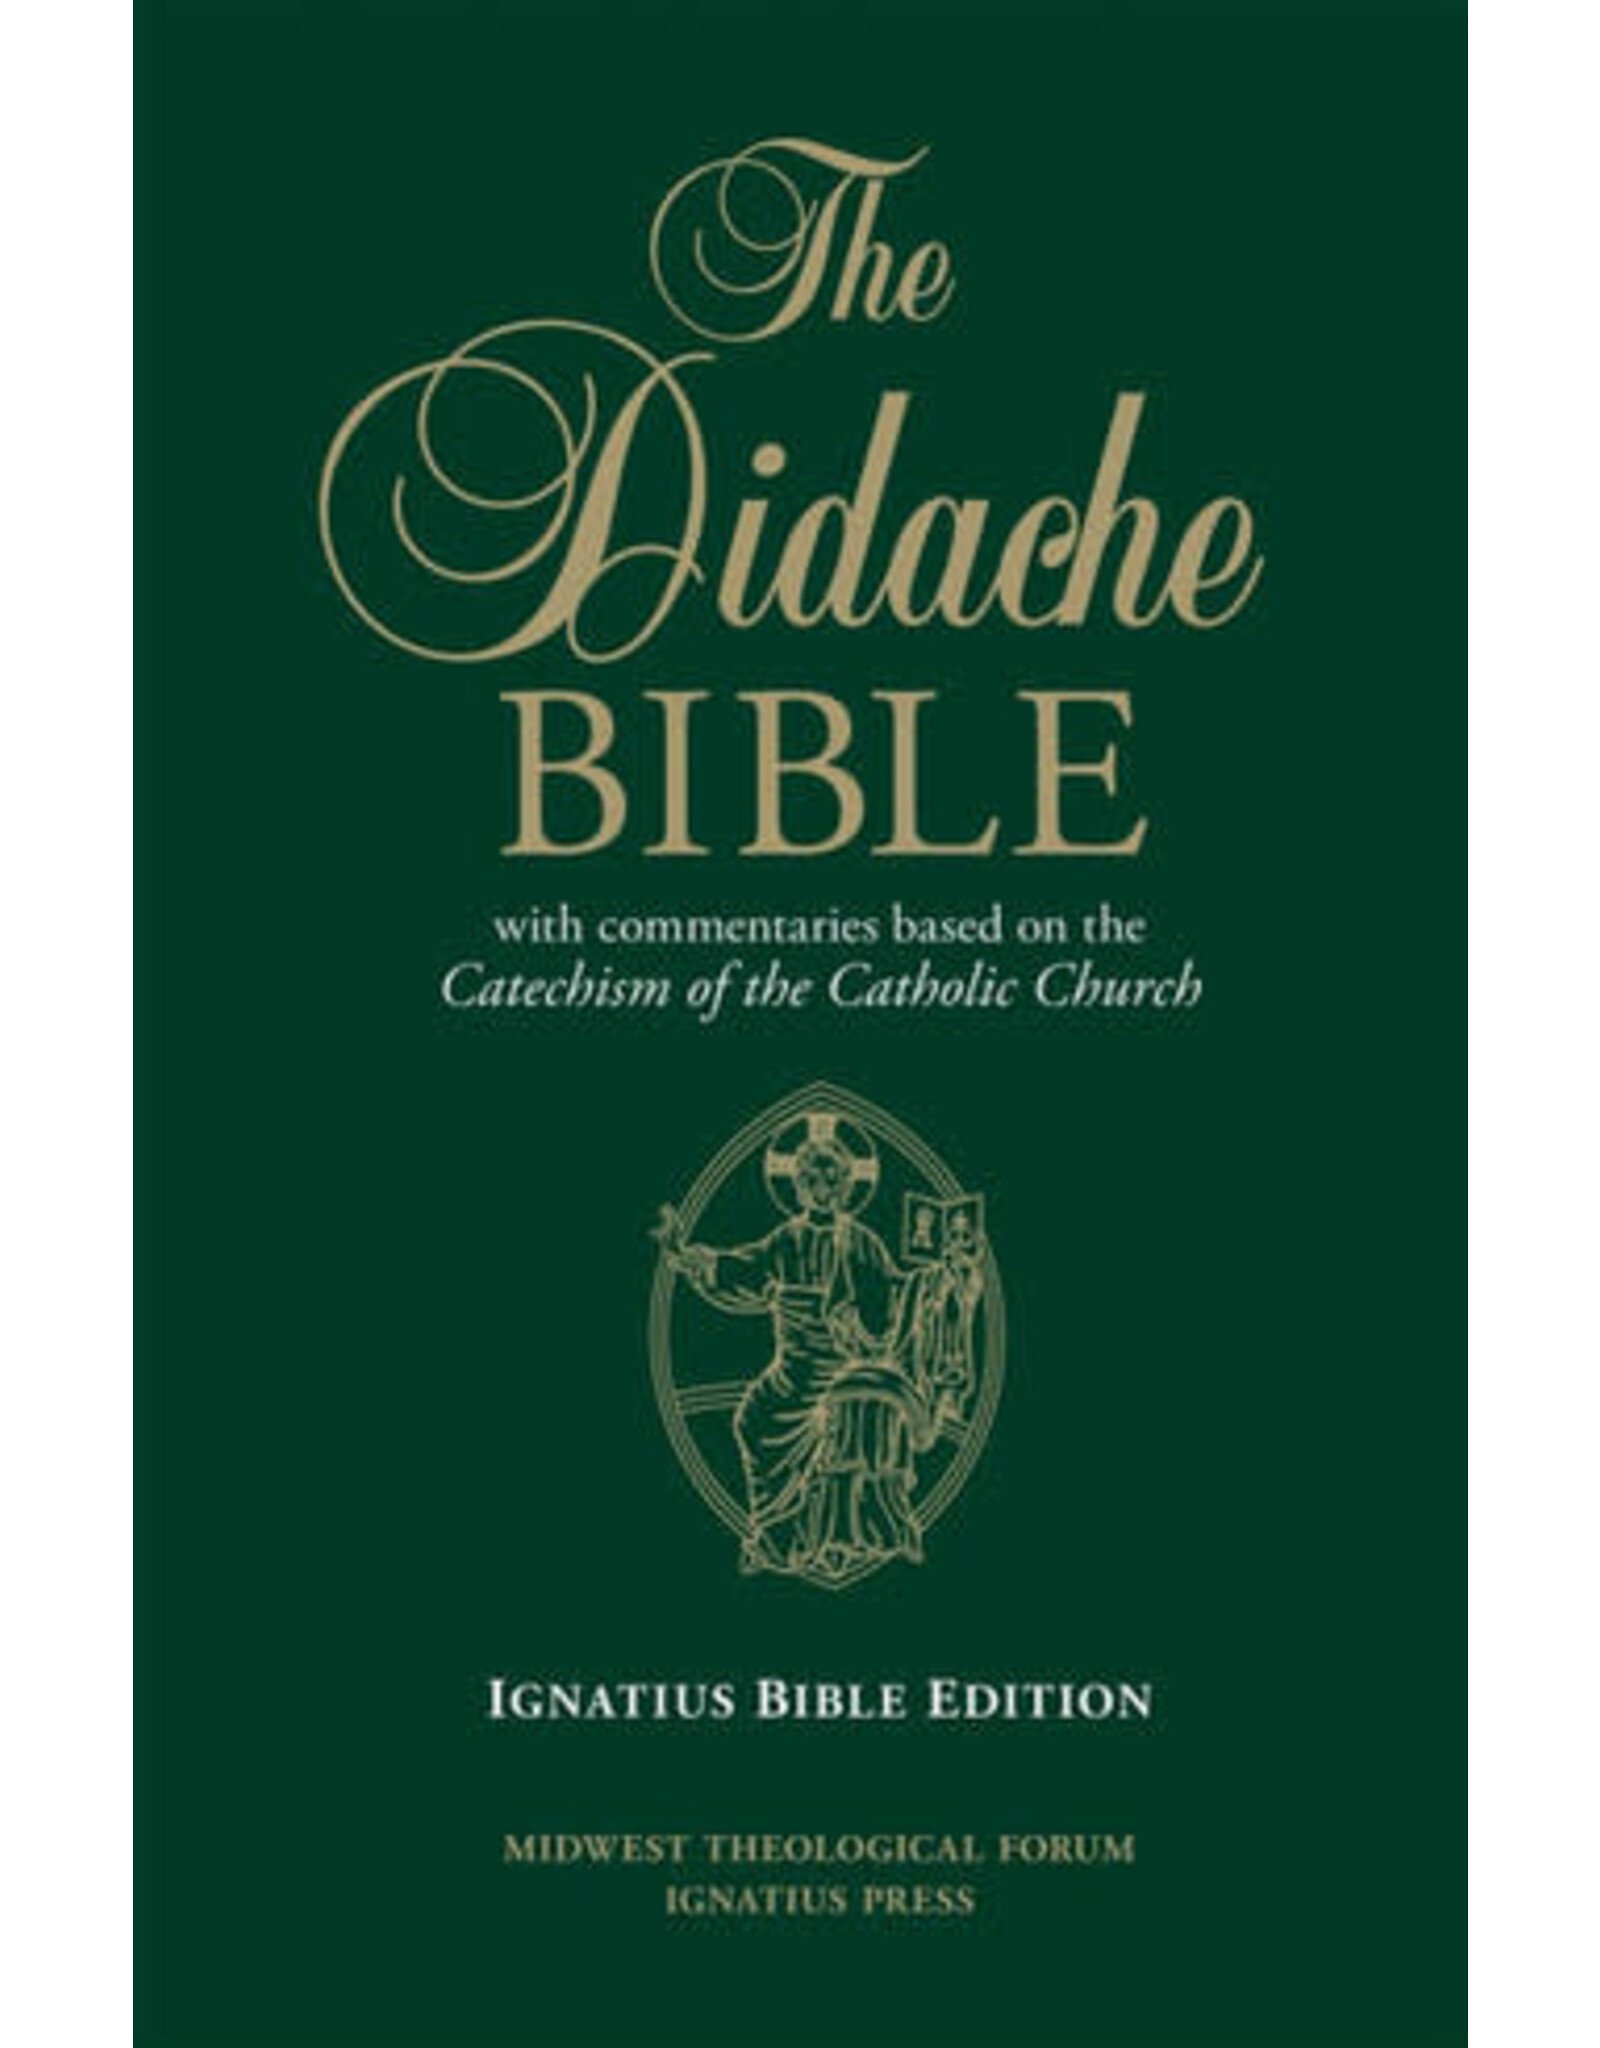 Ignatius Press The Didache Bible with Commentaries Based on the Catechism of the Catholic Church